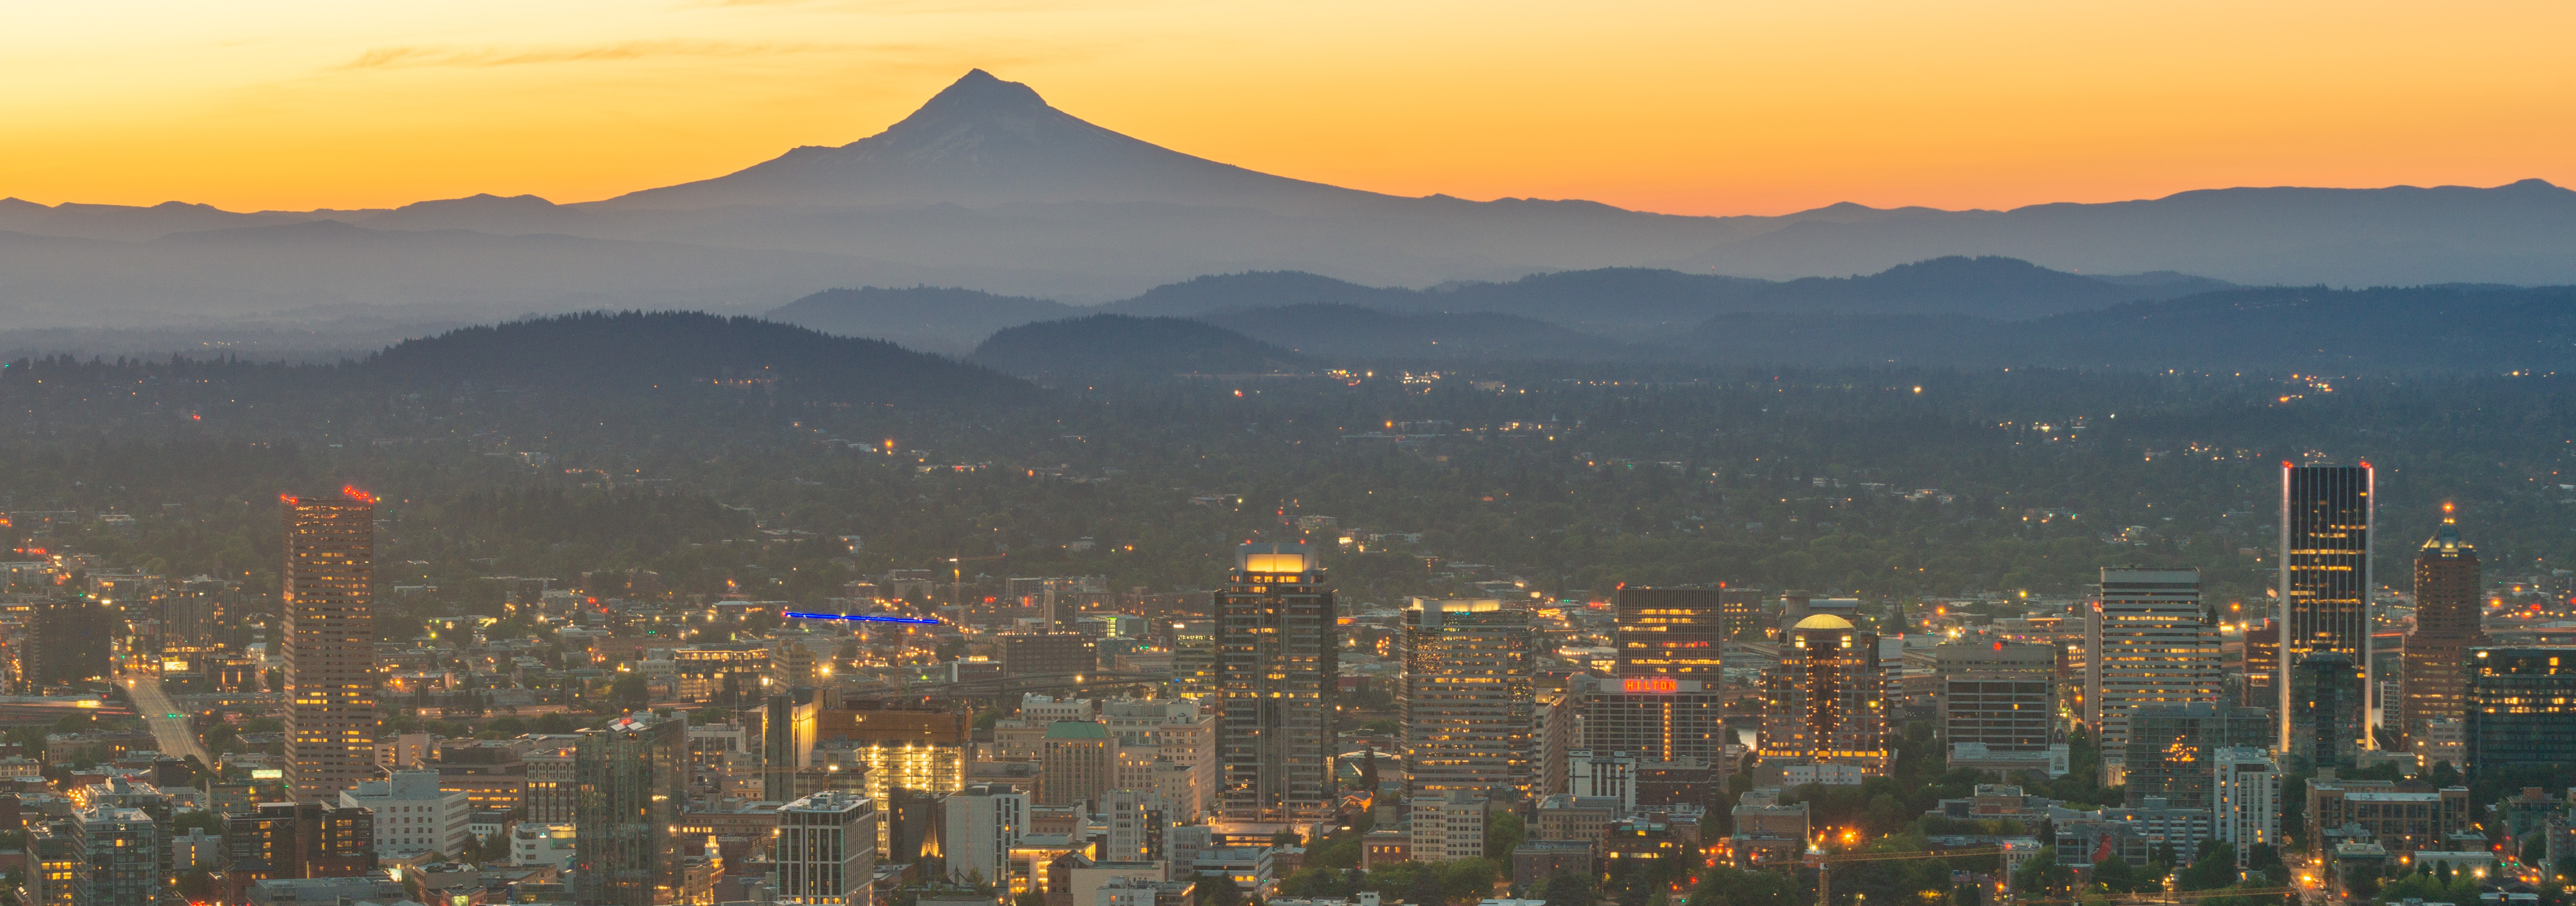 An aerial view of Portland, Oregon, with mountains in the distance.